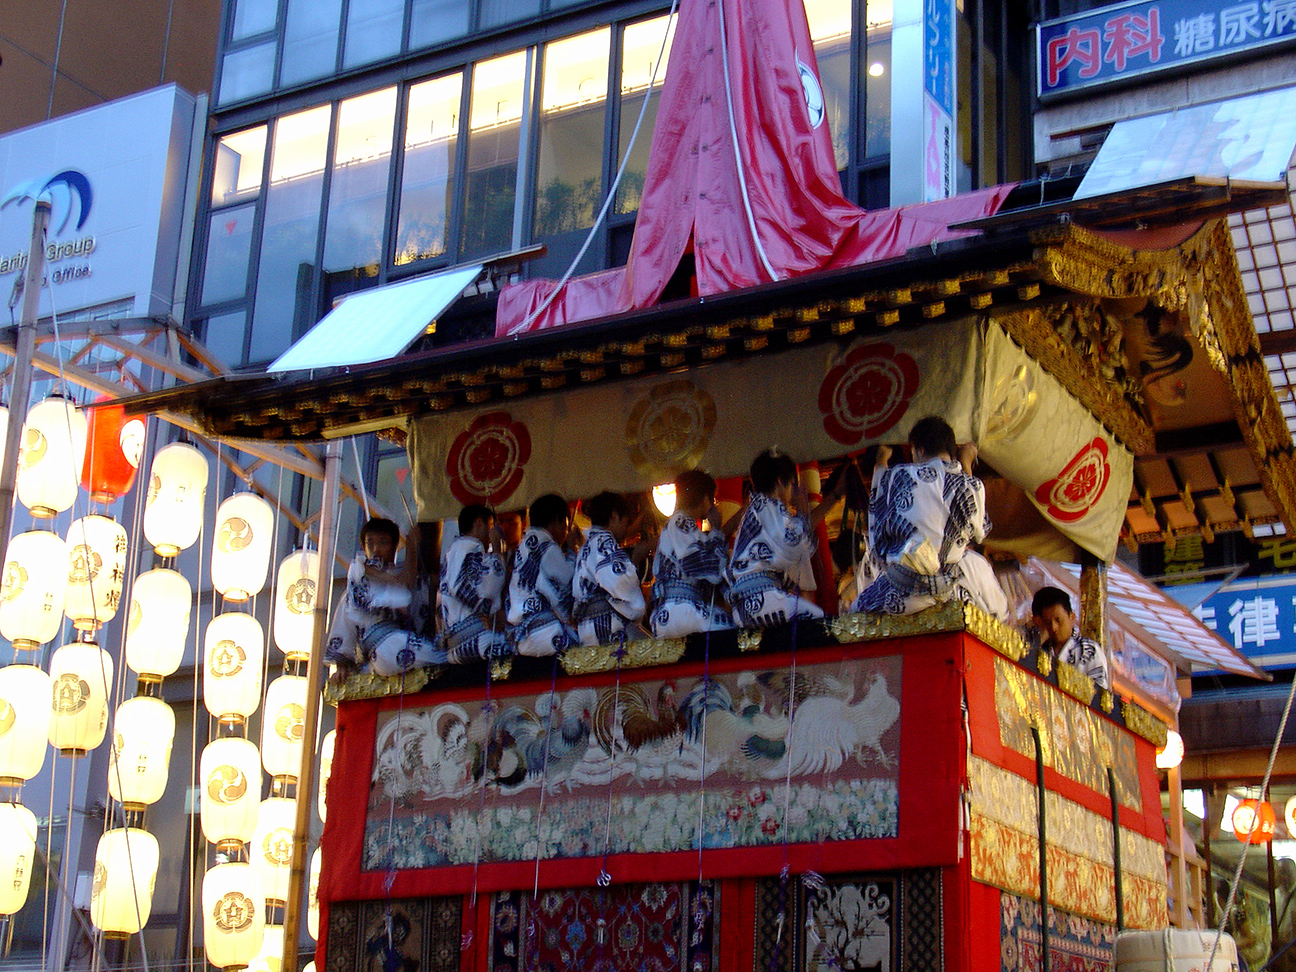 Artist sitting in the float and playing music.